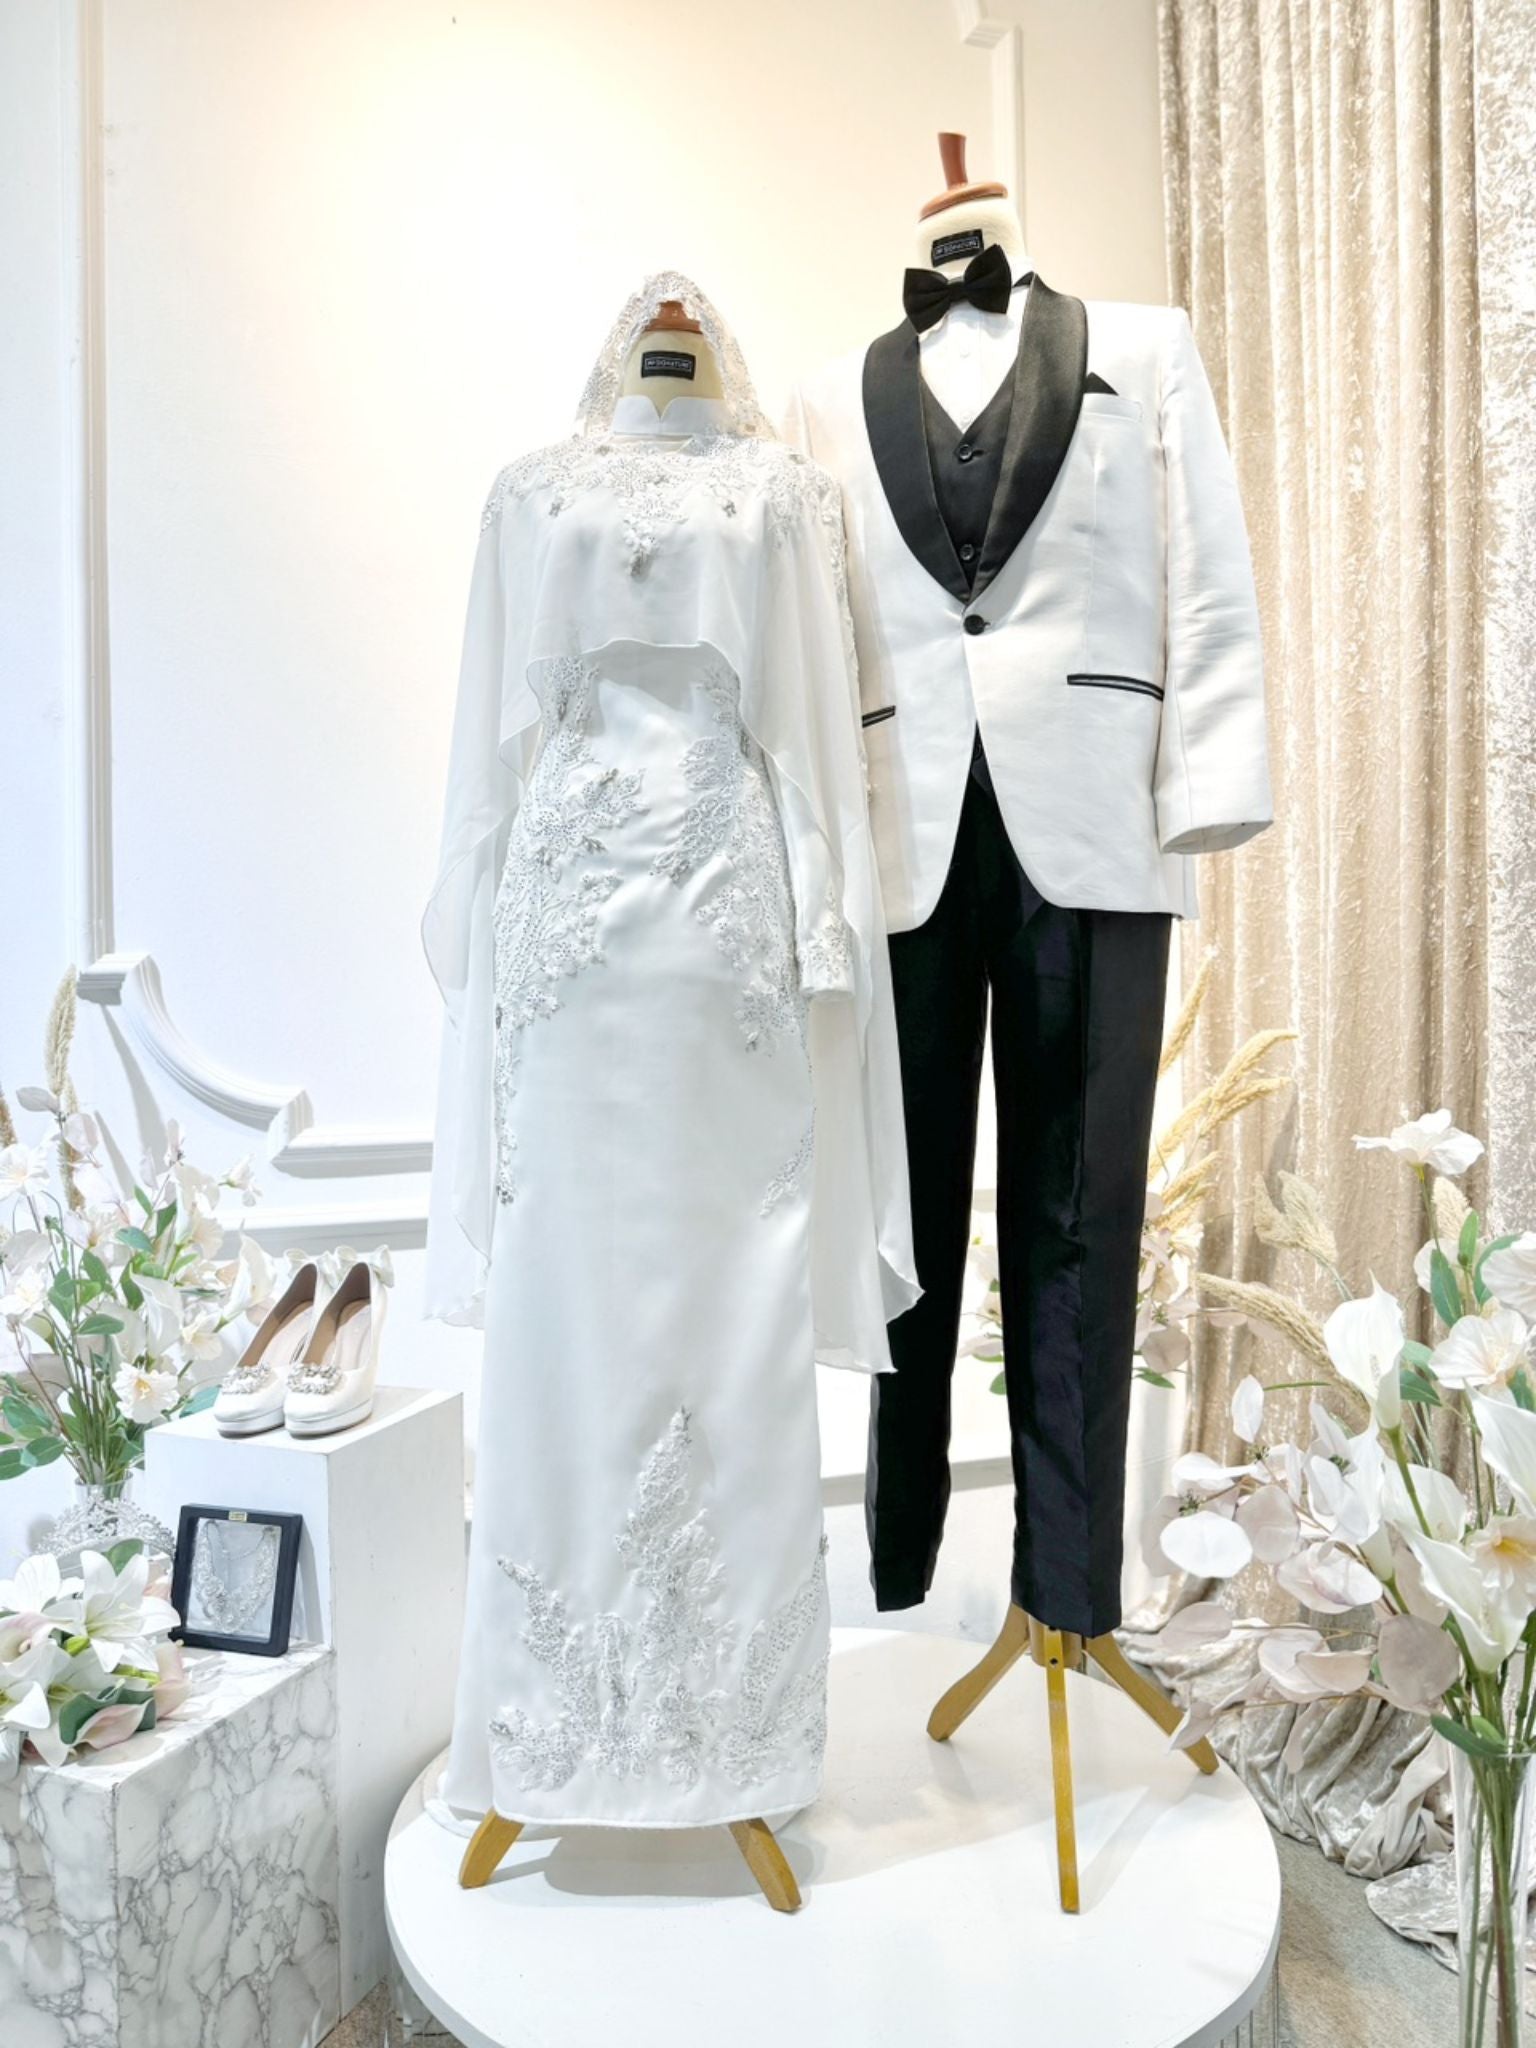 Introducing WARDAH's exquisite Baju Pengantin Off White Double Face Dress with Detachable Cape, priced at MYR 899.00. Tailored for the bride in sizes XS to M and the groom in sizes S to 2XL, both in a charming off-white hue. The bride's ensemble features a stylish dress with a detachable cape, while the groom dons the signature suit design. Crafted from premium double face material, this set, originally priced at RM1150, promises timeless elegance for your special day.